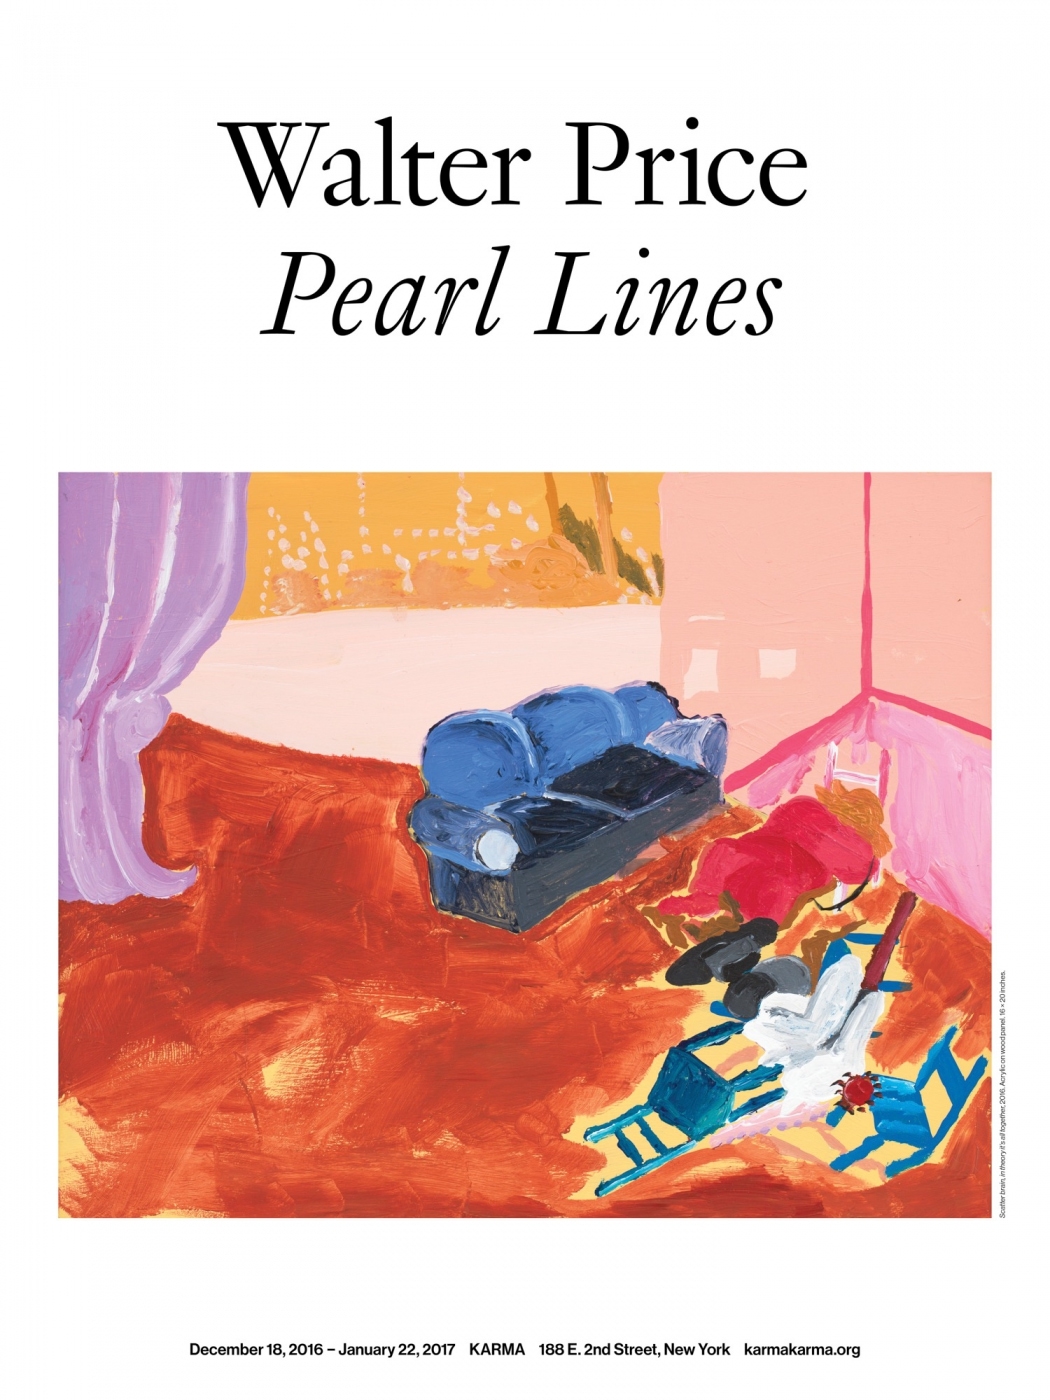 Walter Price, Pearl Lines